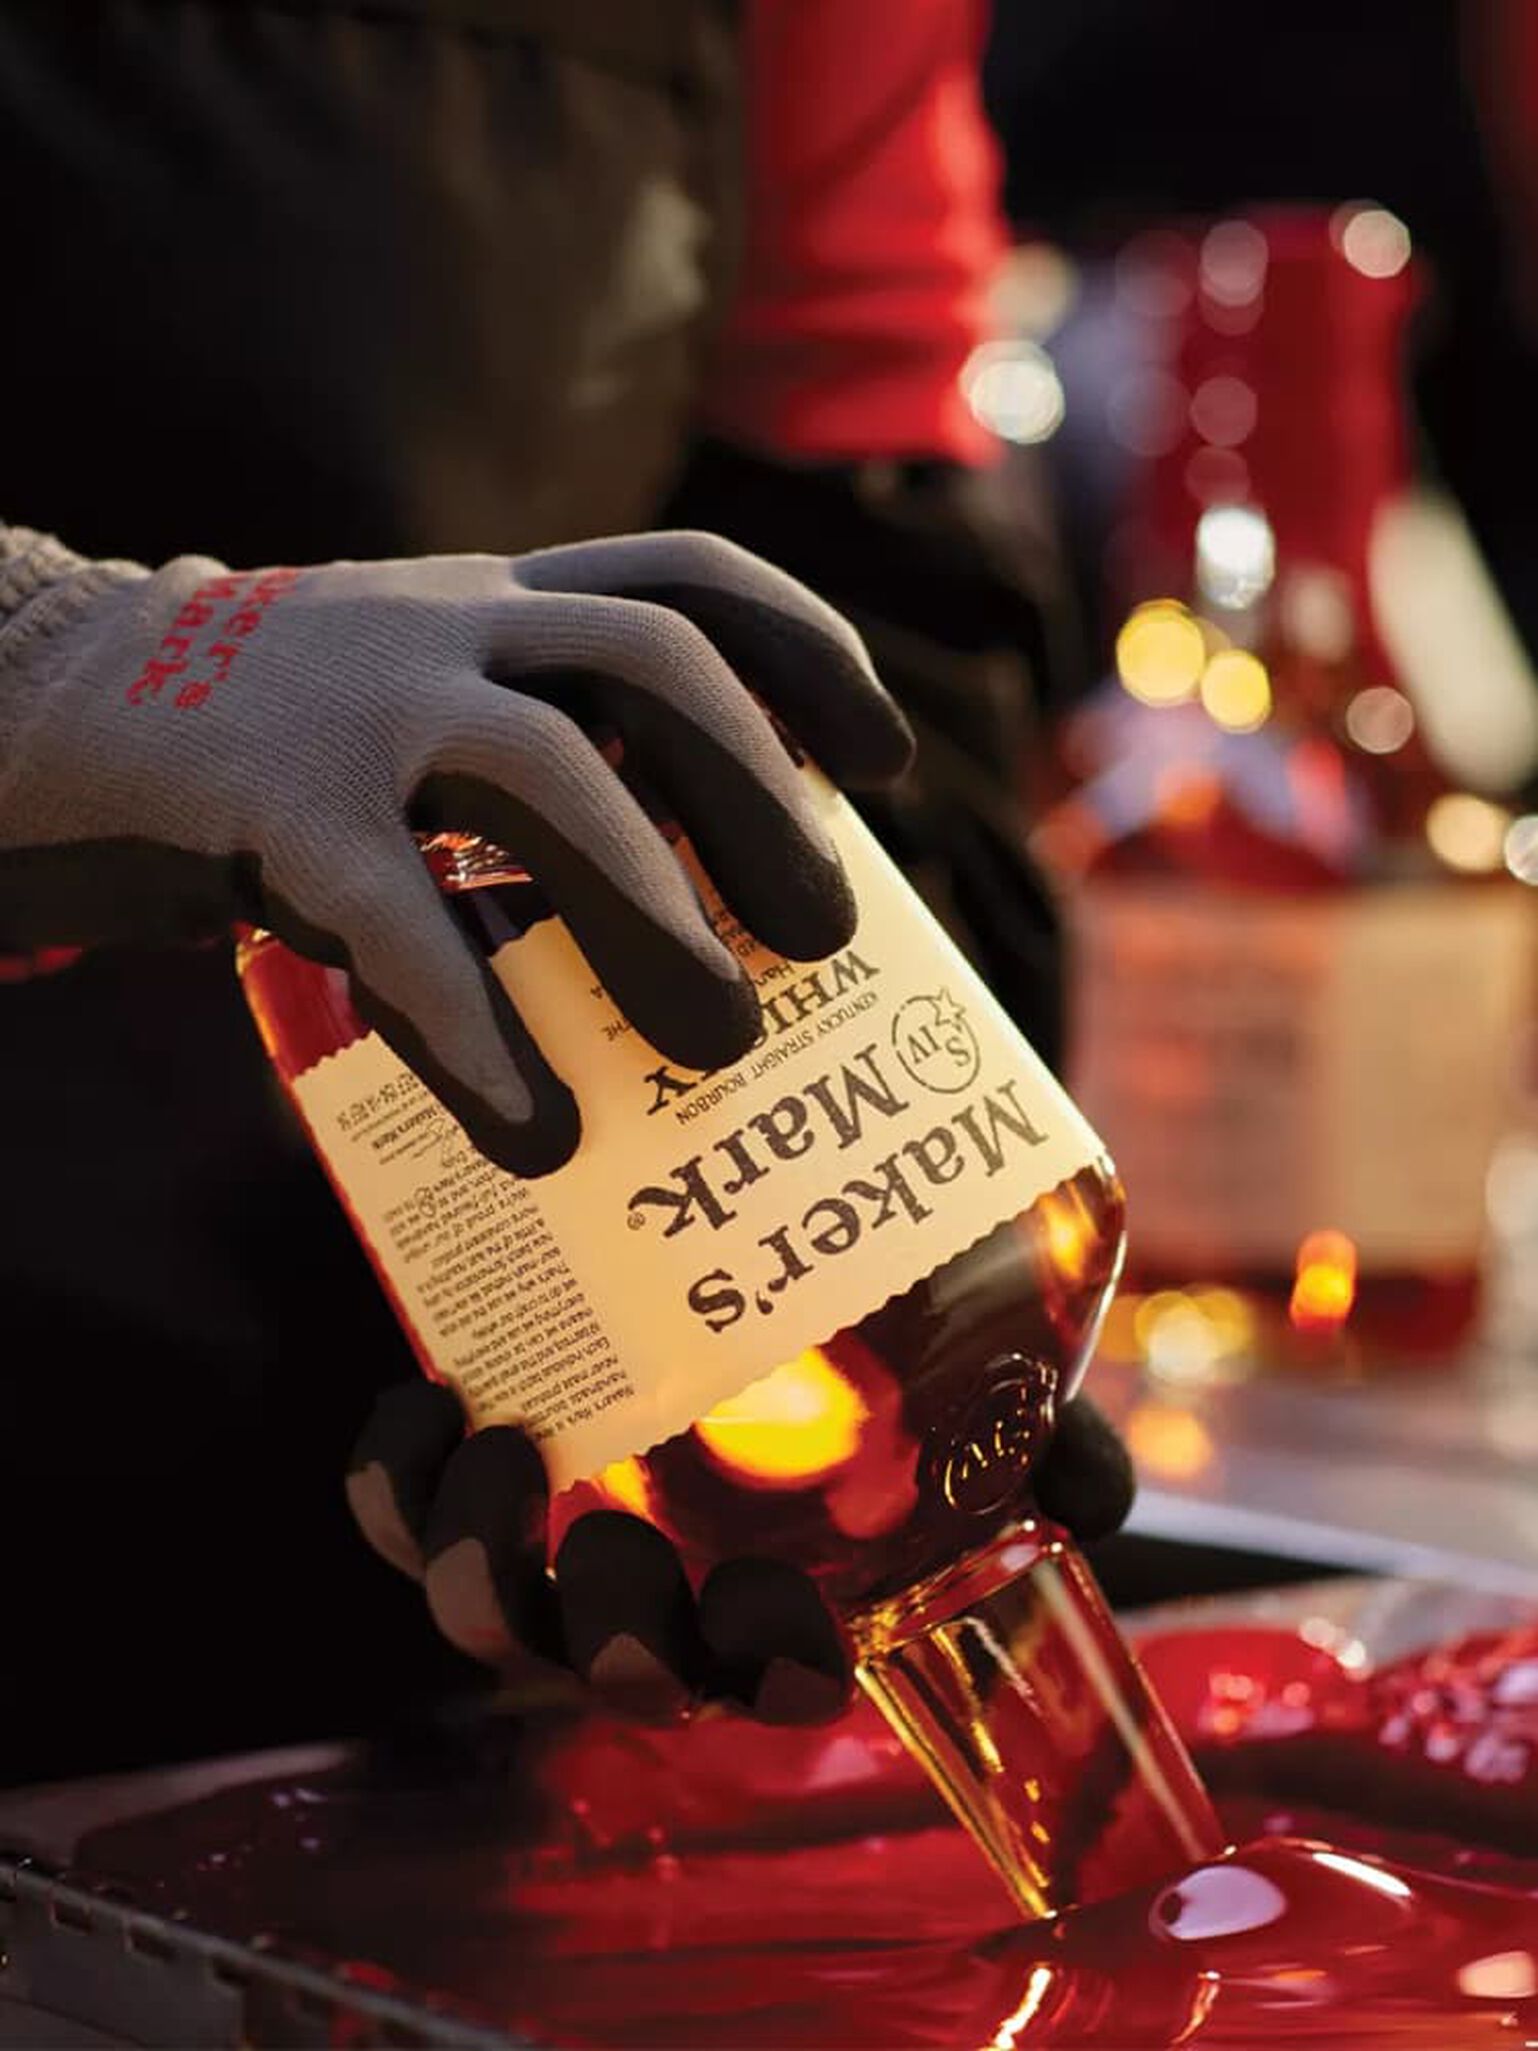 A bottle of Maker's Mark is dipped into a vat of the iconic red wax that seals the bottle